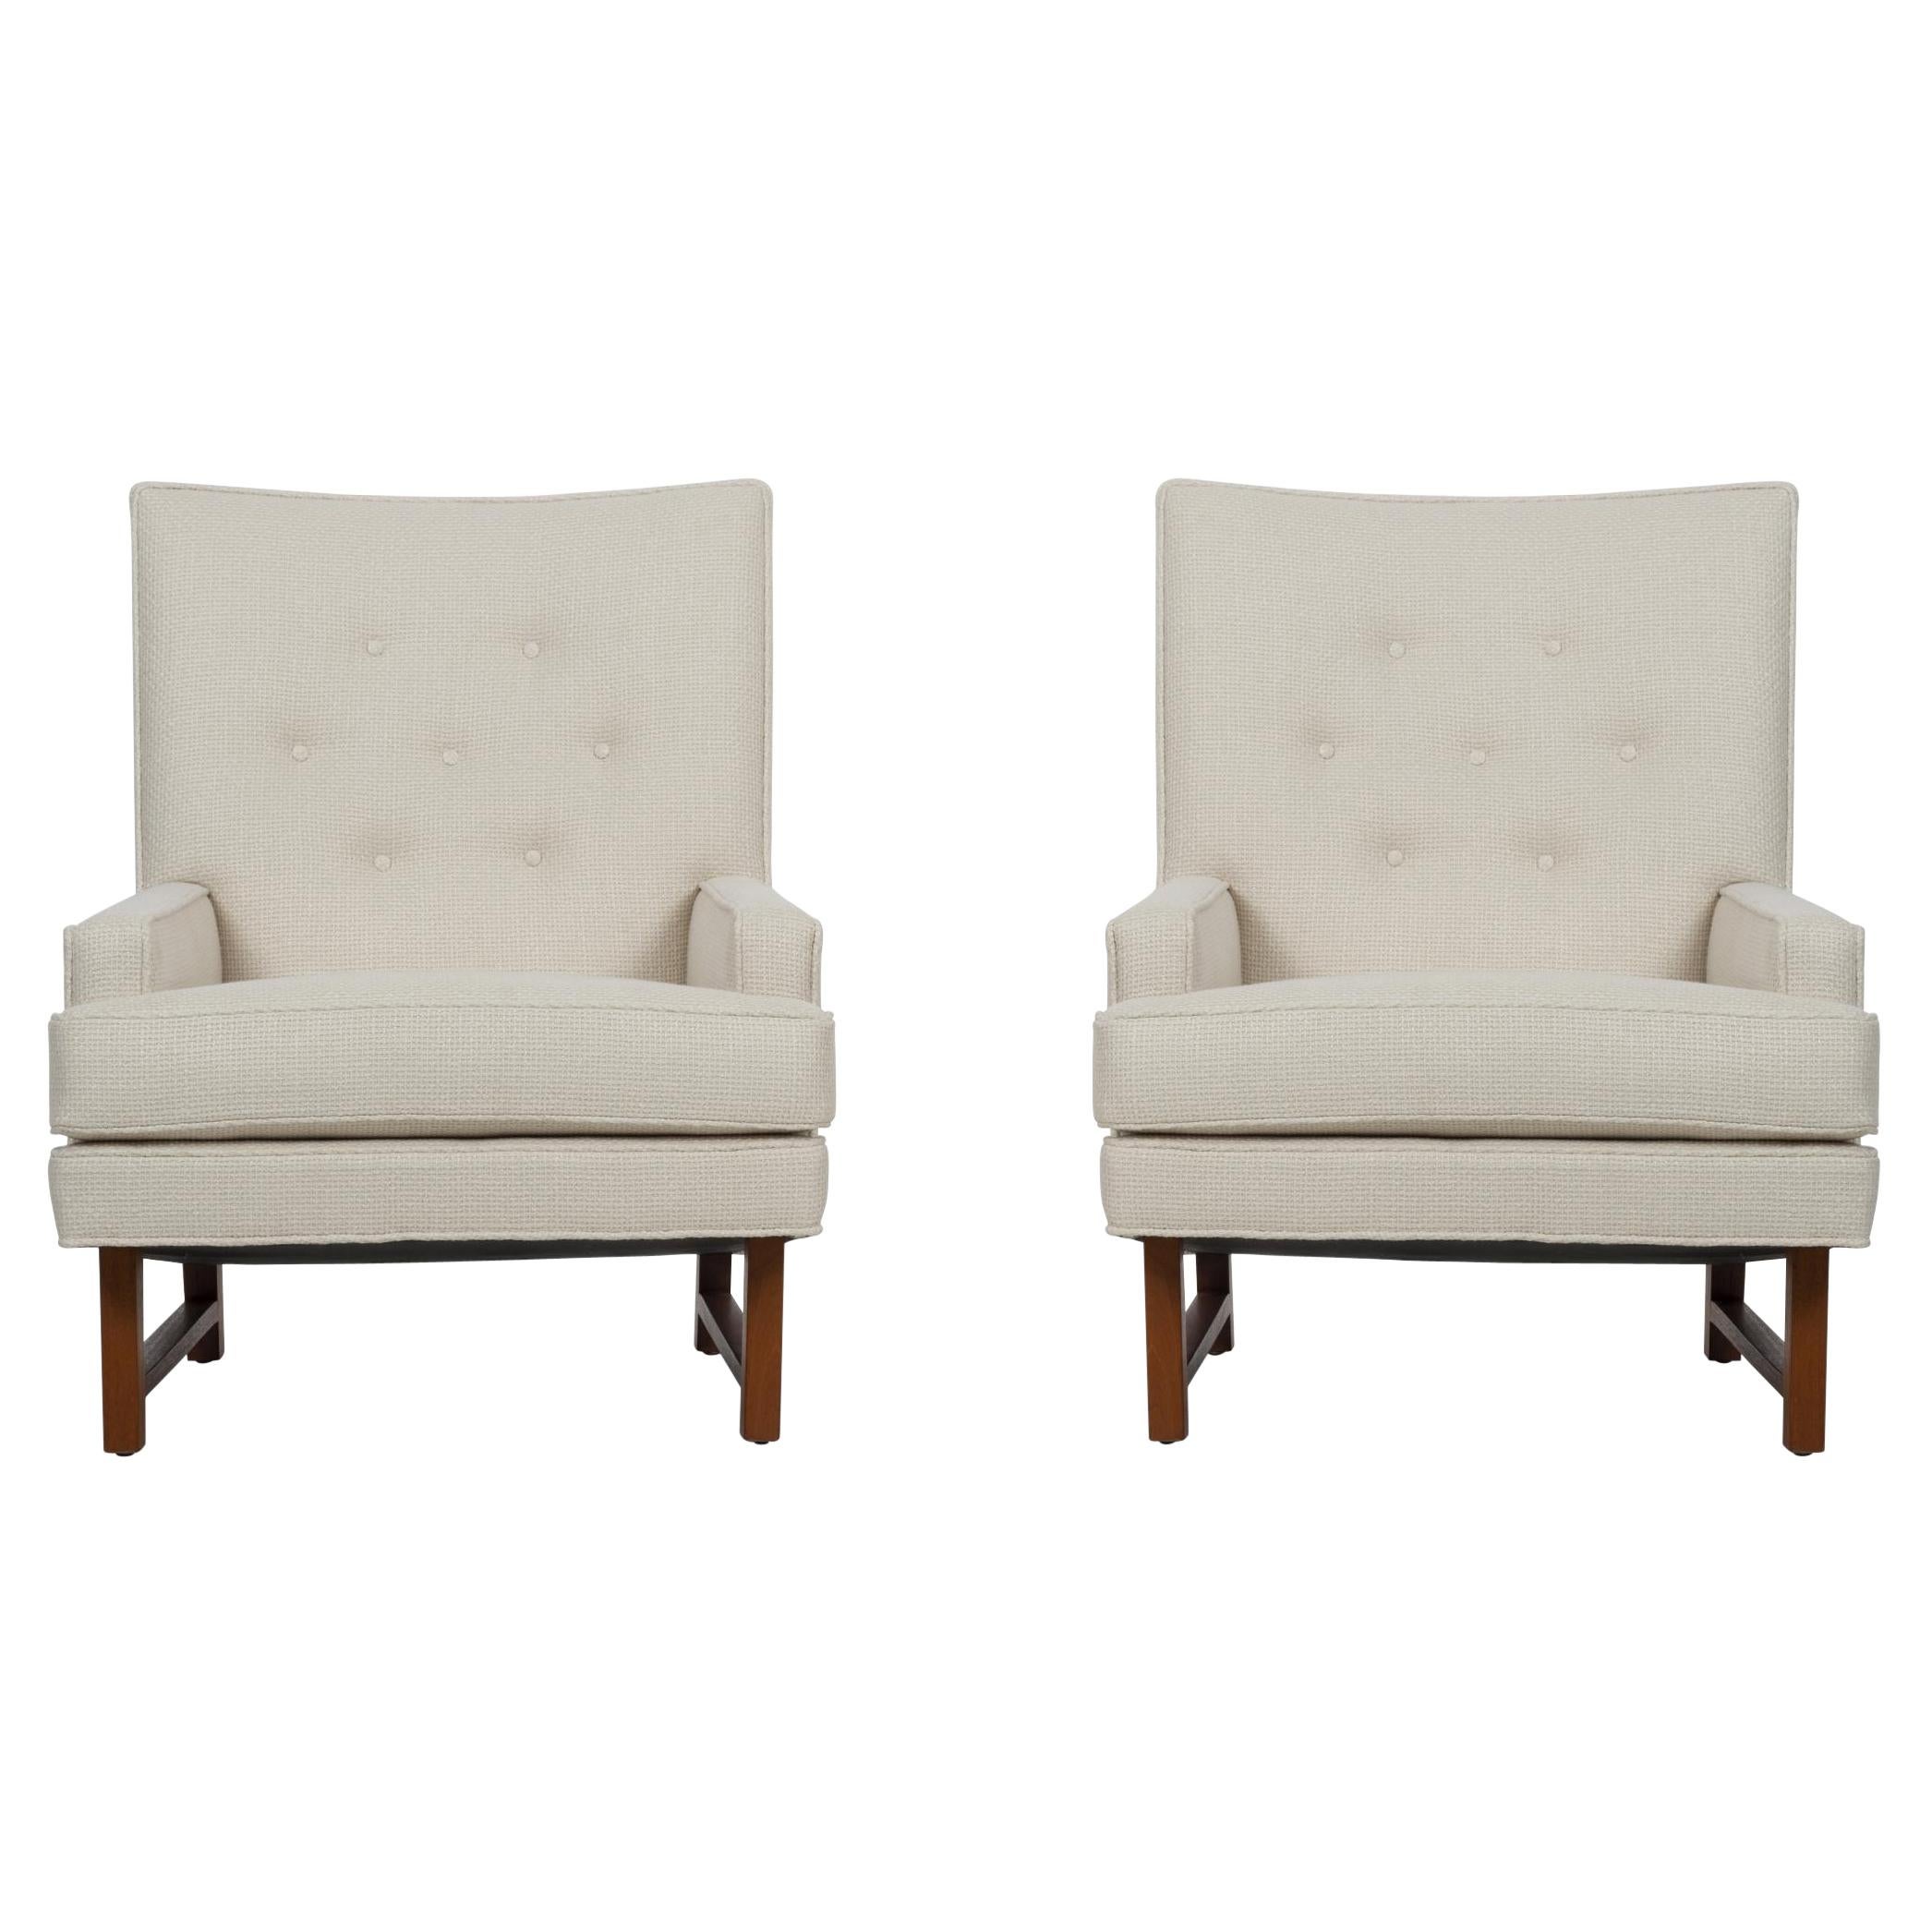 Pair of Edward Wormley Janus Group Lounge Chairs